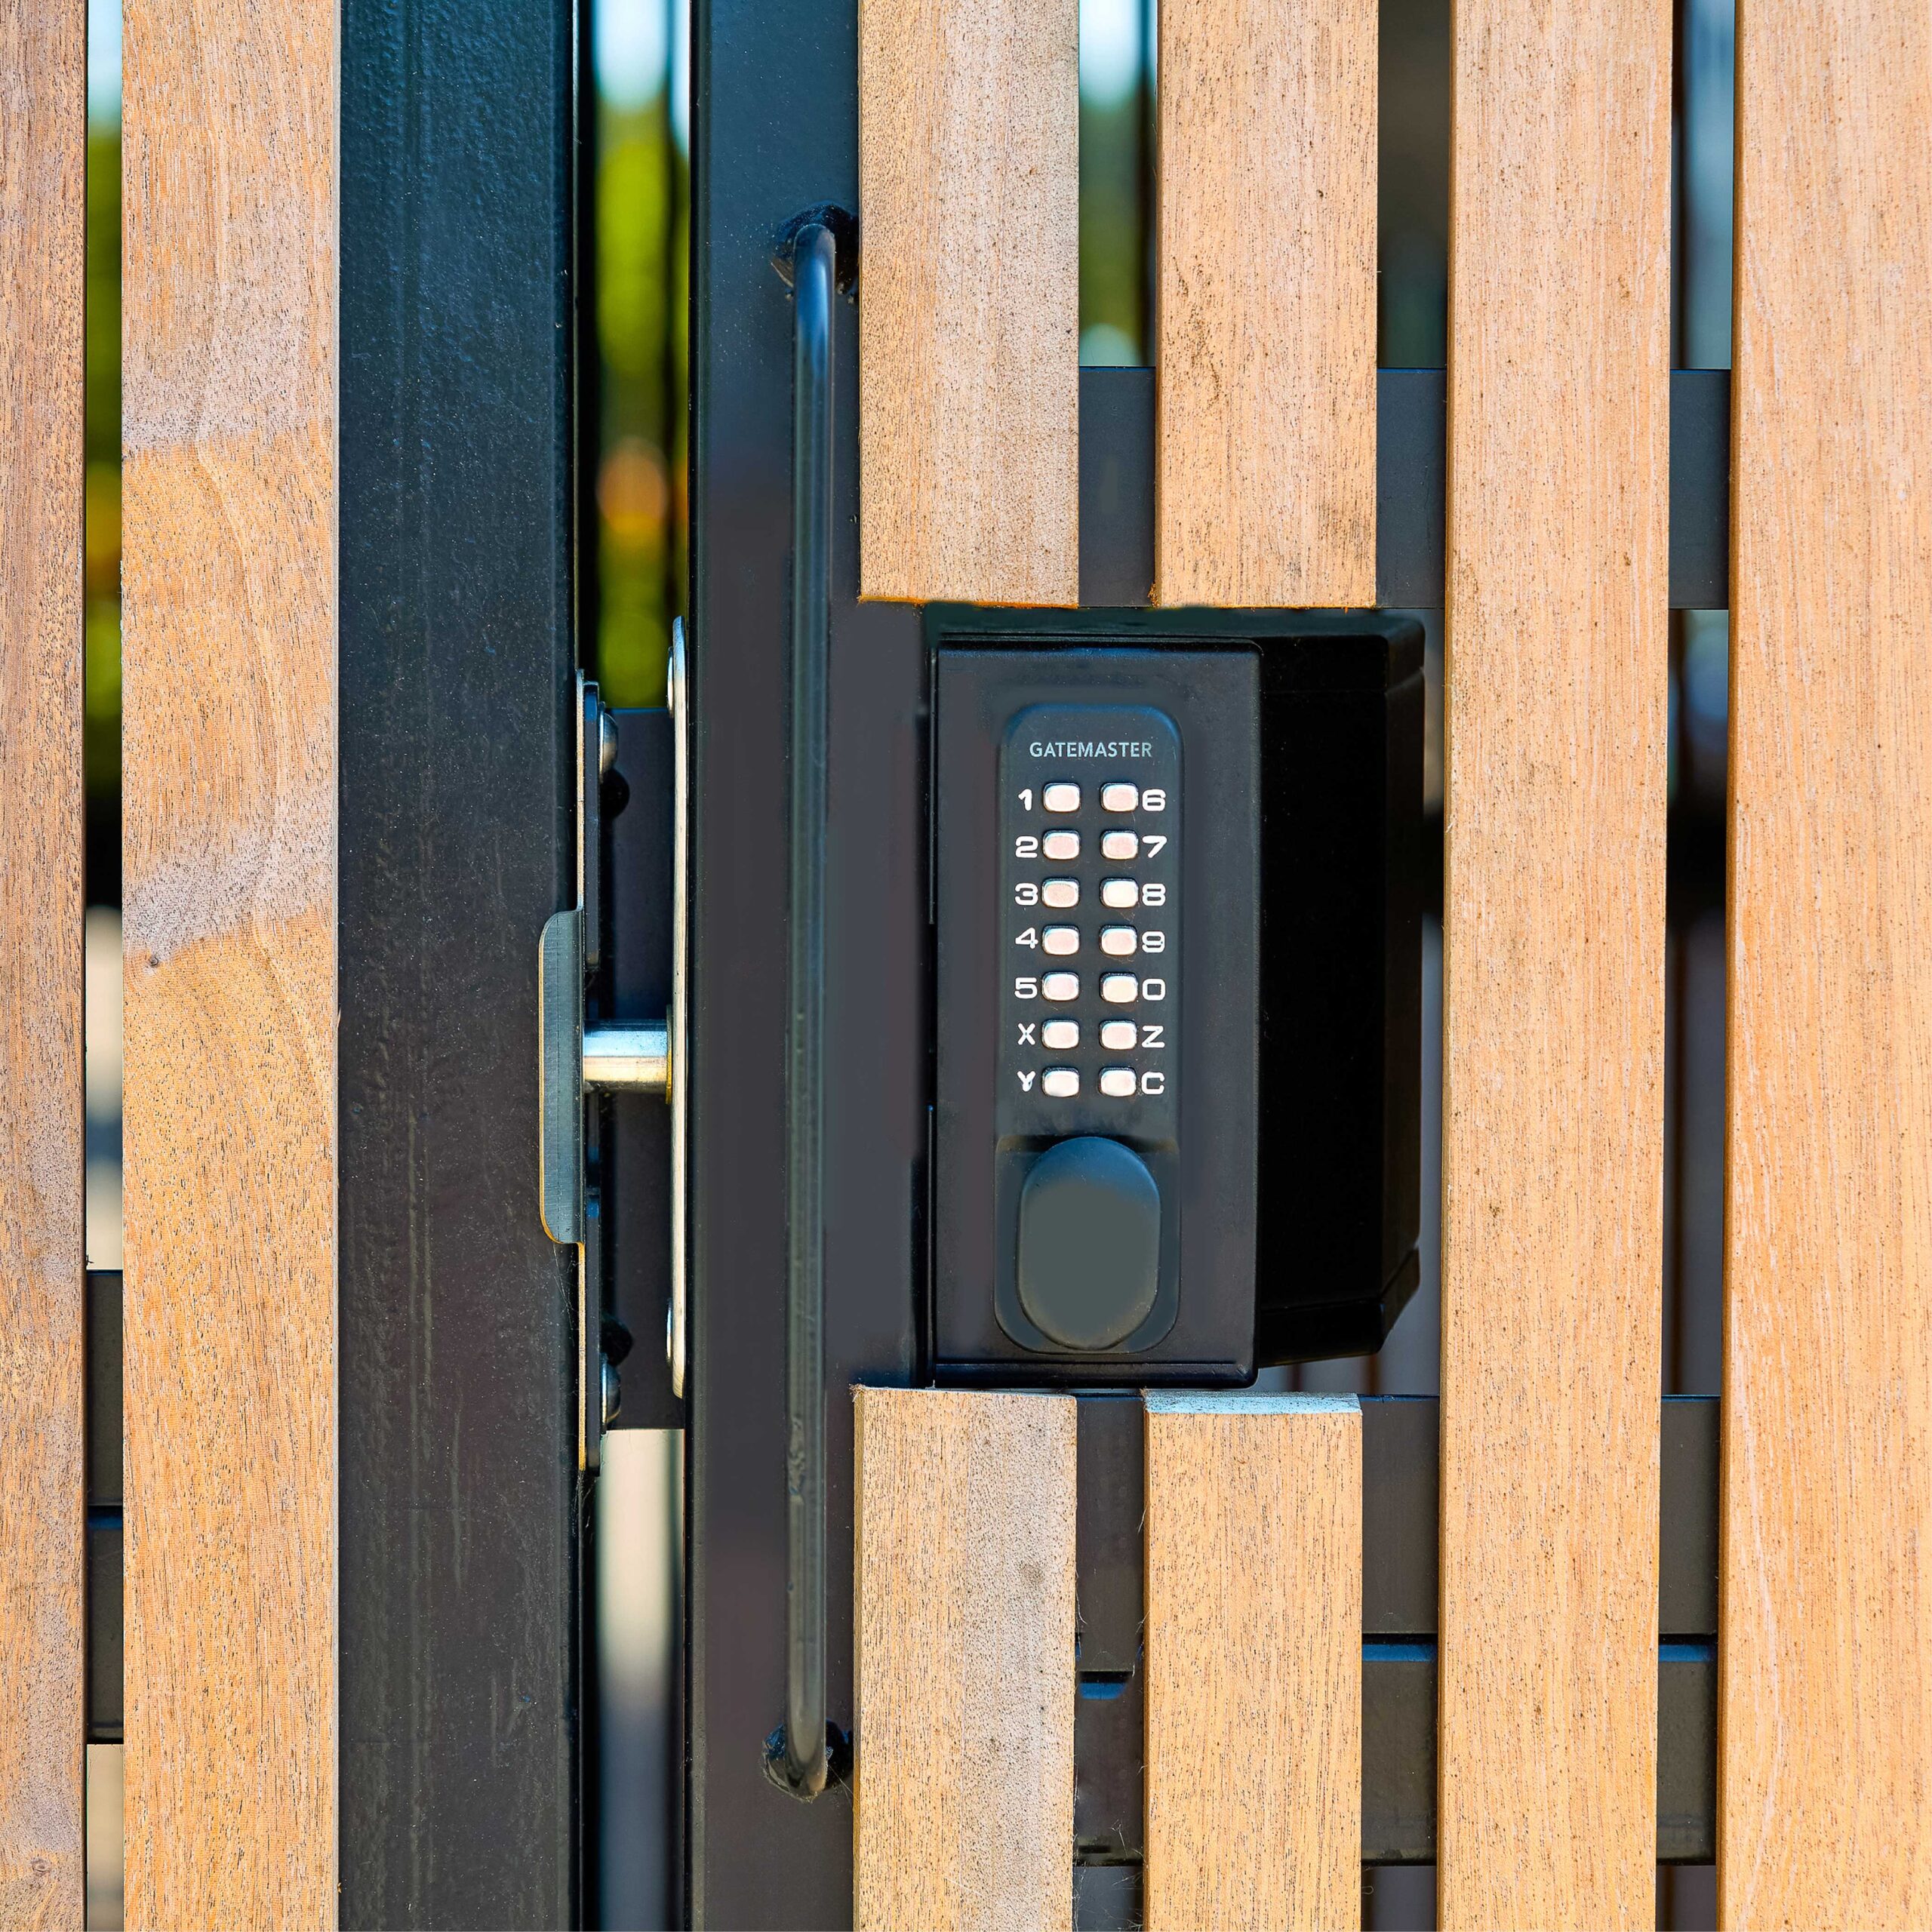 A keypad lock mounted on a wooden gate, showing a sturdy metal latch and a black keypad with buttons labeled with numbers and letters.